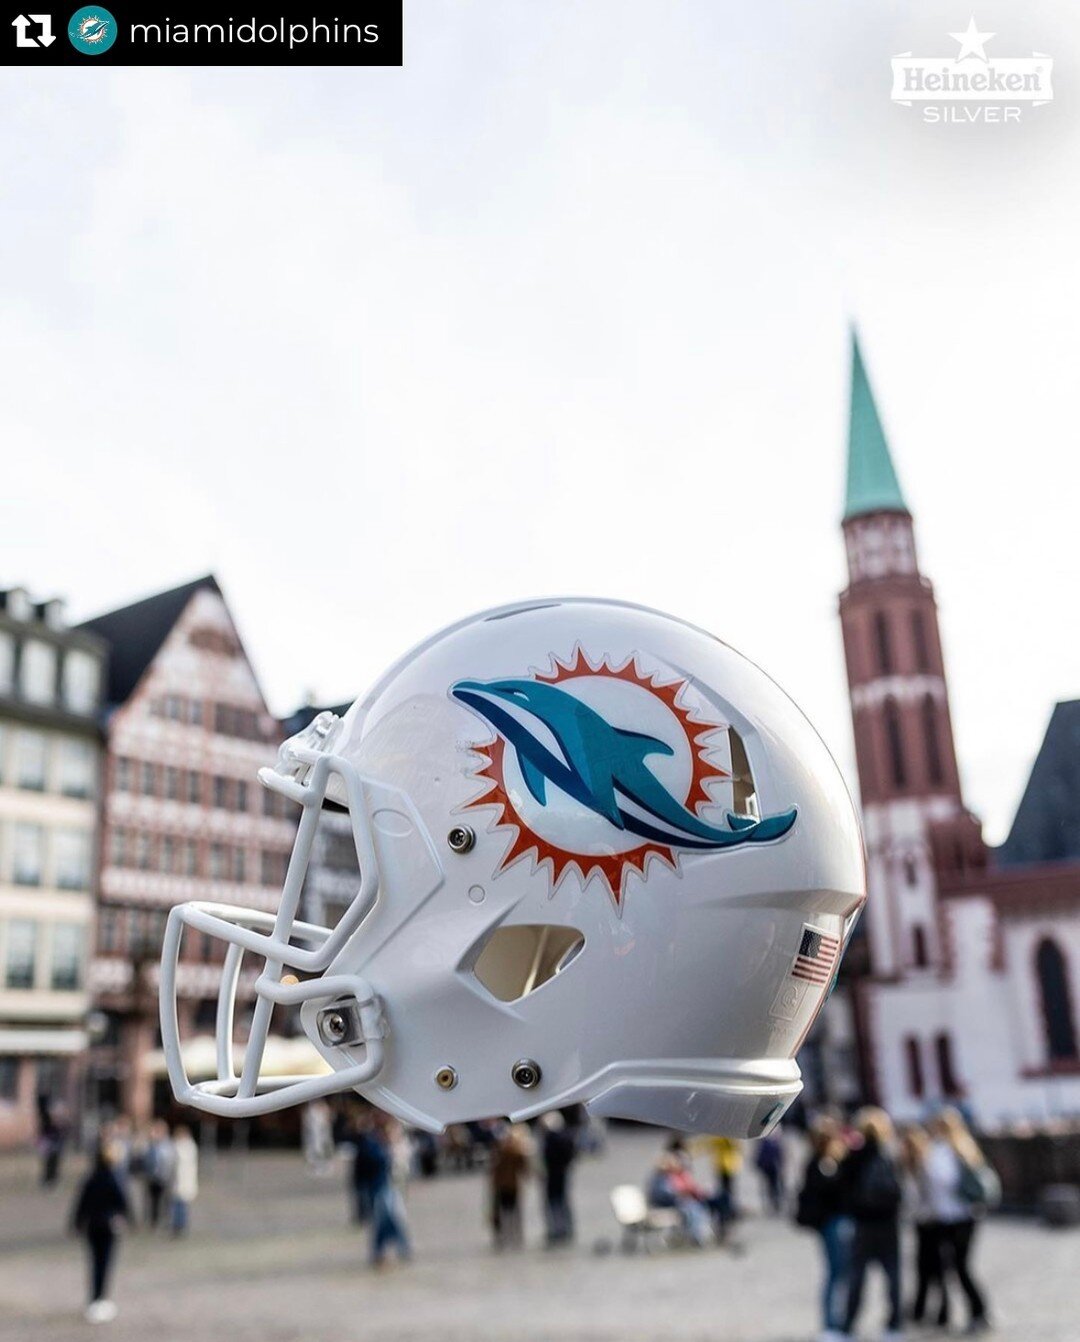 See you all bright and early tomorrow morning for game day across the pond in GERMANY! 🇩🇪🏈

📸: @miamidolphins

#MIAvsKC #FinsUp